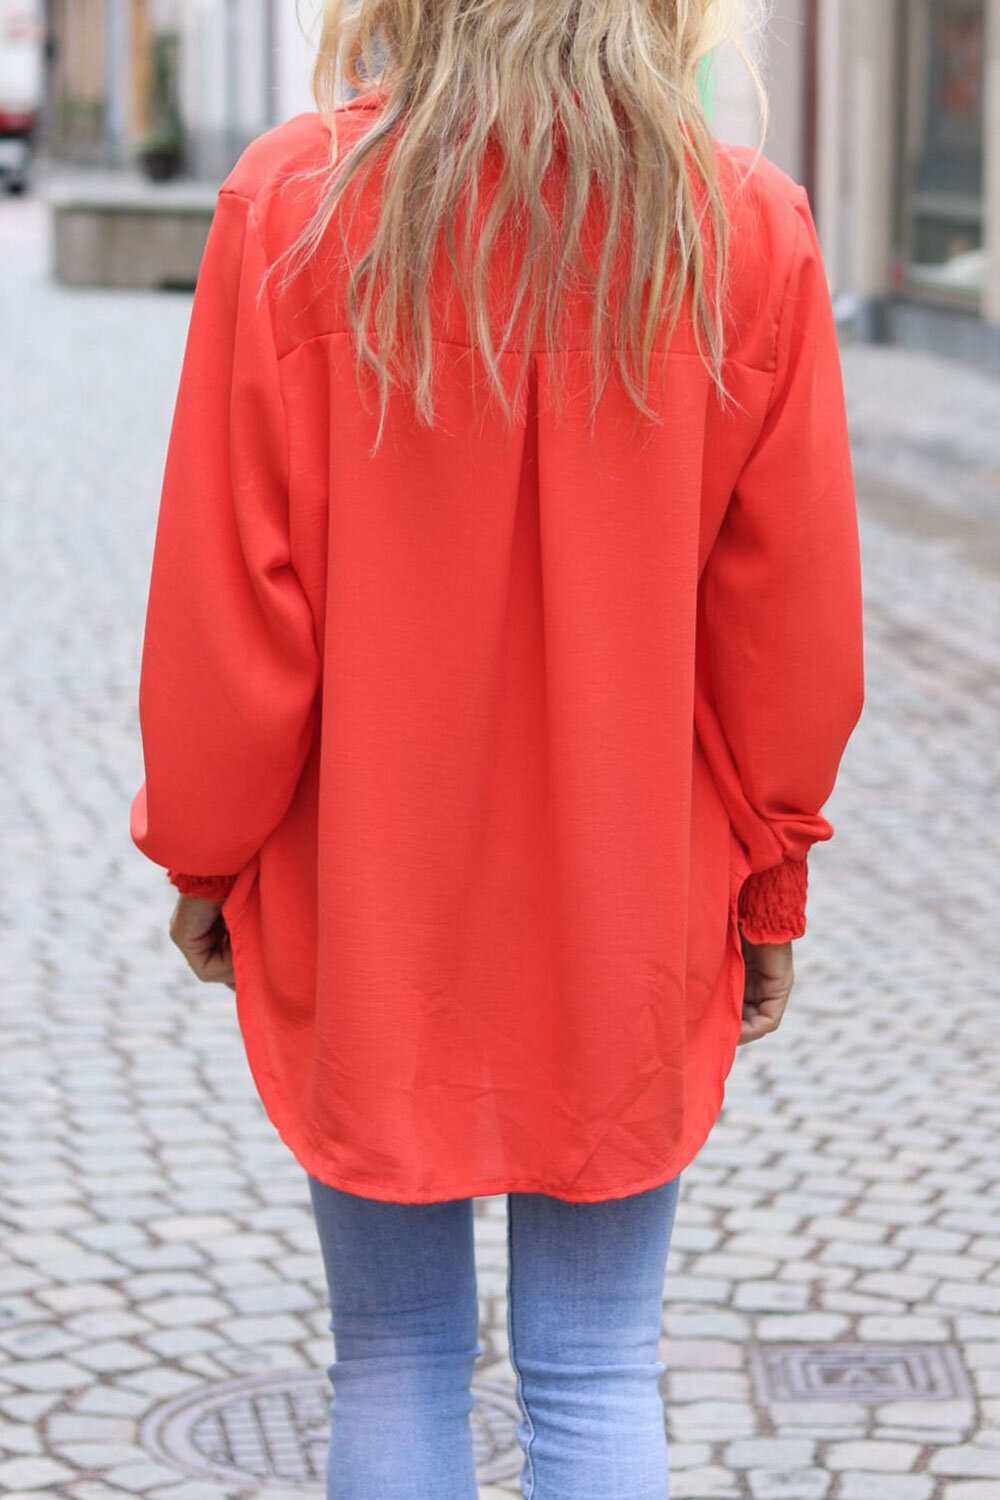 Sia Blouse with Ruffles - Corall/Orange